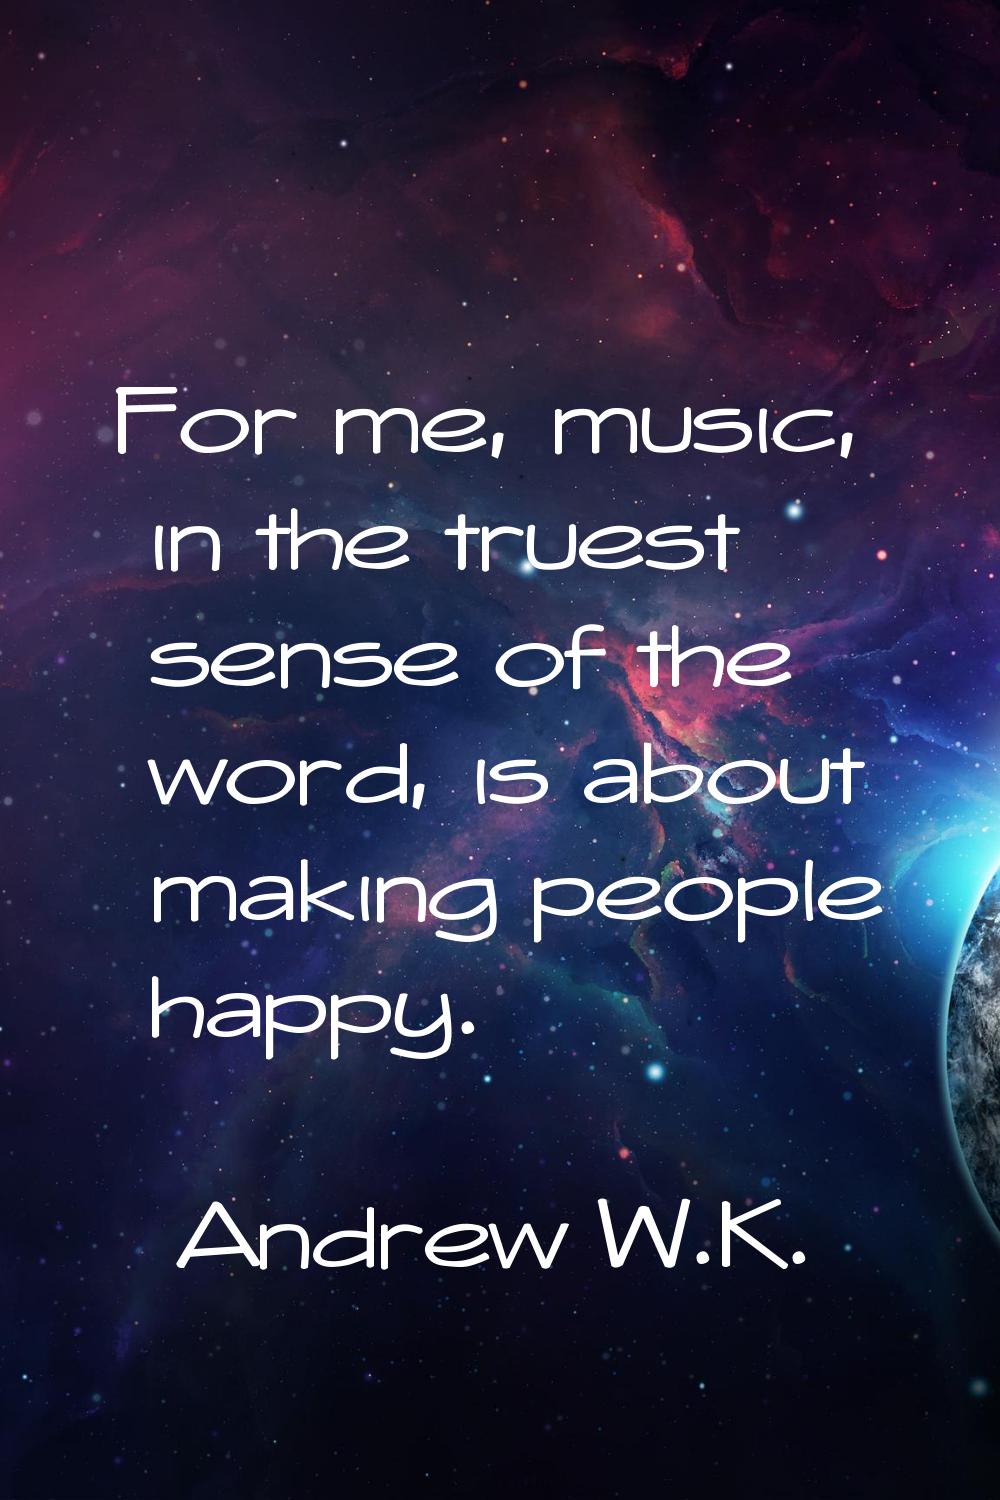 For me, music, in the truest sense of the word, is about making people happy.